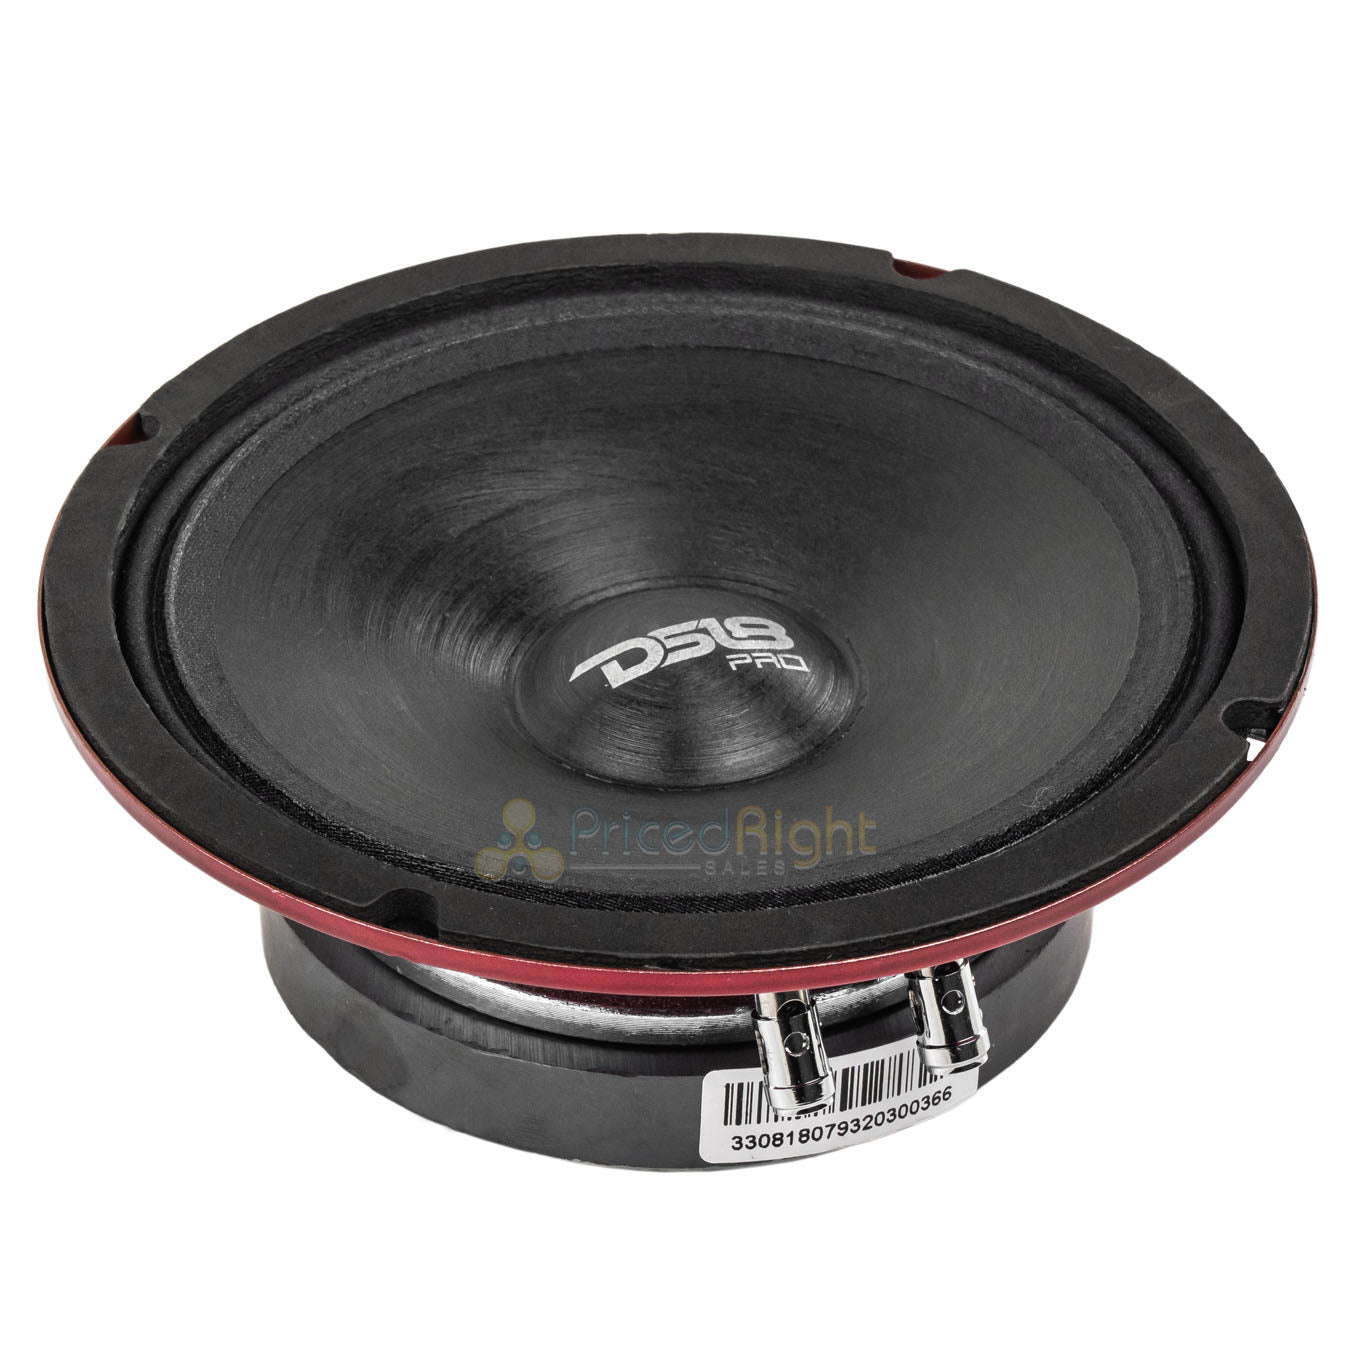 DS18 PRO-SM6.2 6.5" Motorcycle Midrange Speaker 400W Max 2 Ohm IP66 Rated 4 Pack